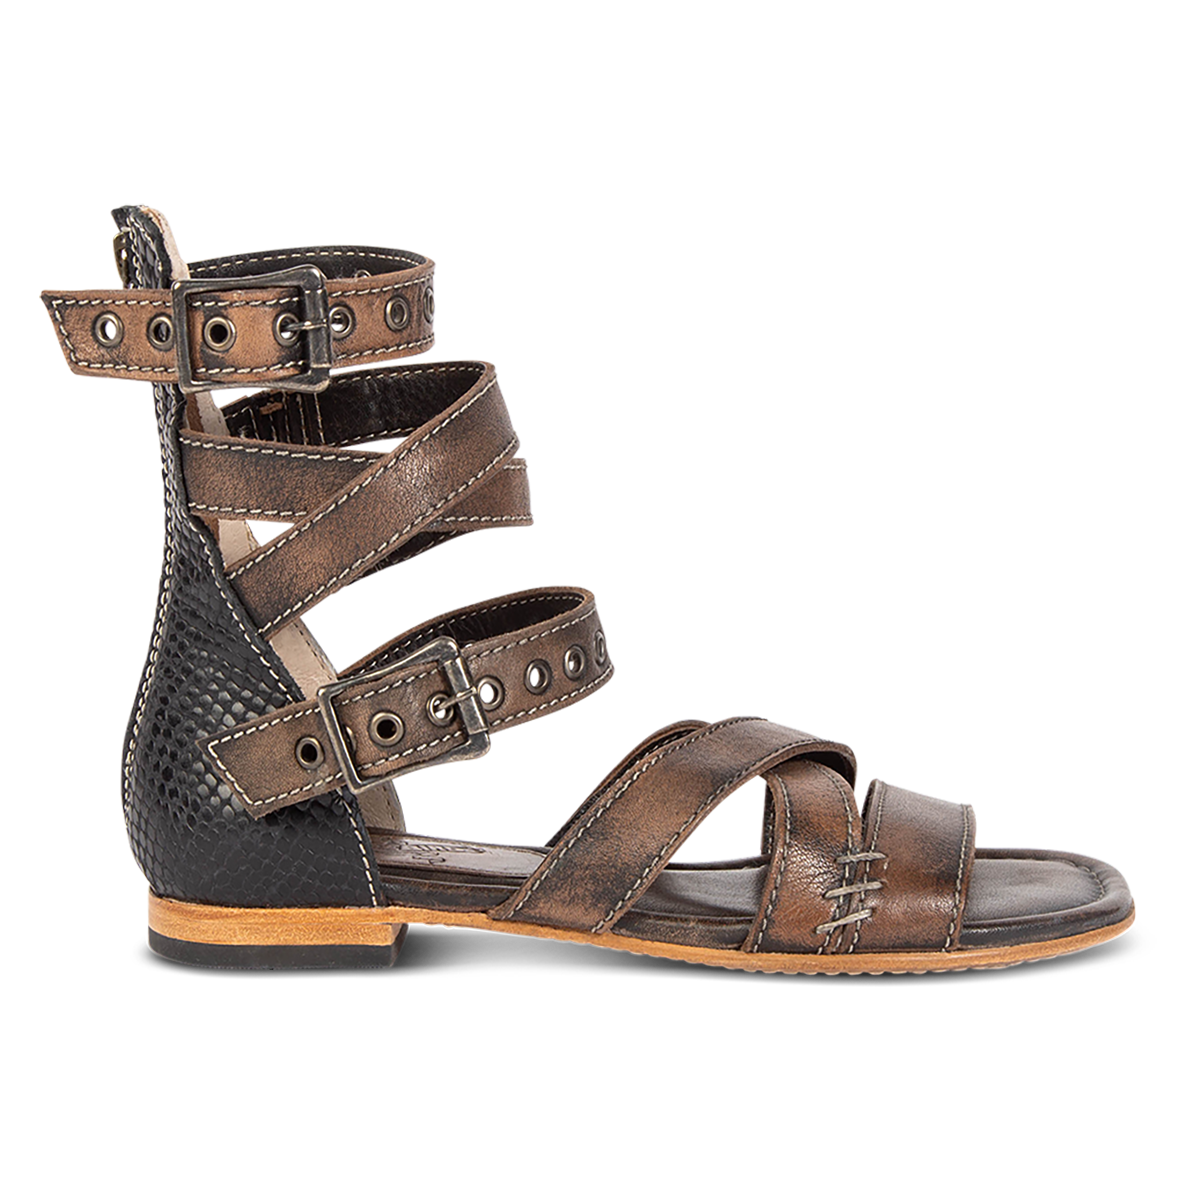 FREEBIRD women's Saylor Black Snake Multi strappy low heeled sandal featuring adjustable buckles and embossed detailing